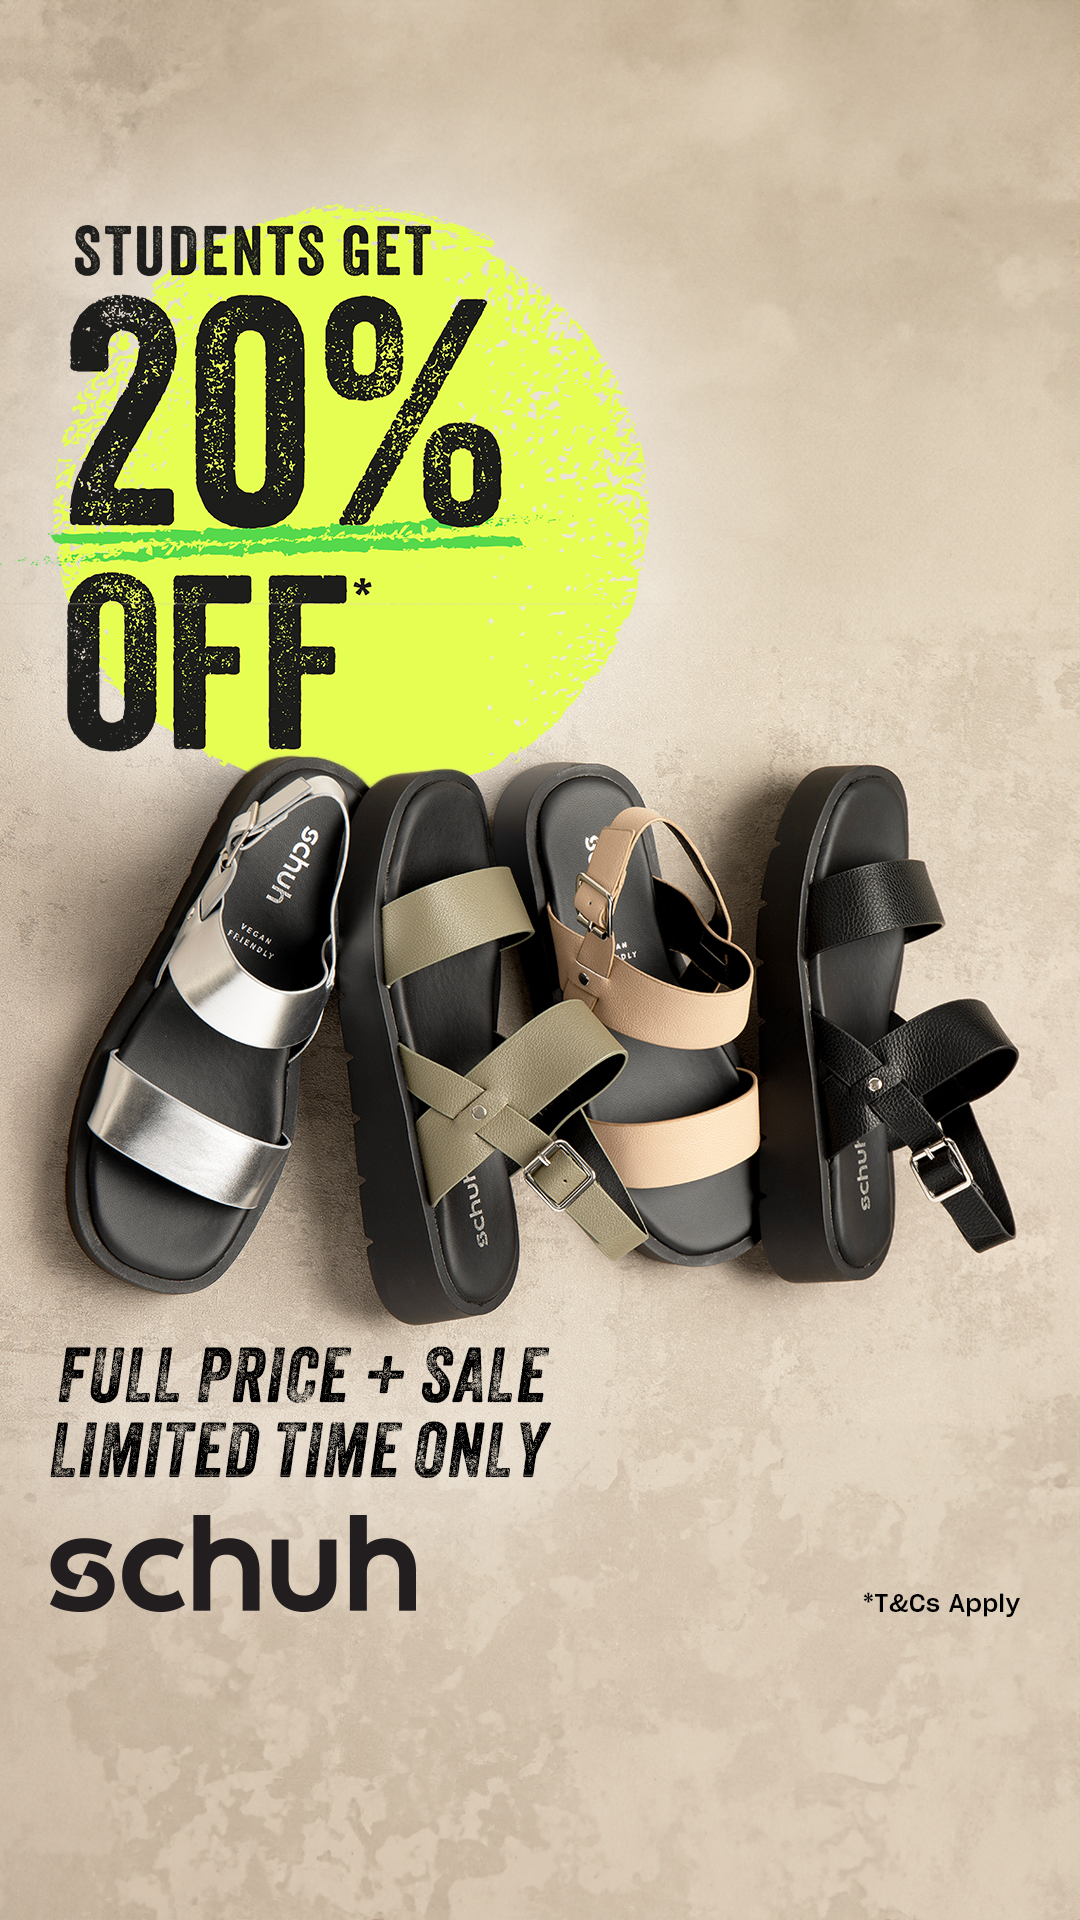 Students get 20% off* full price and sale at Schuh